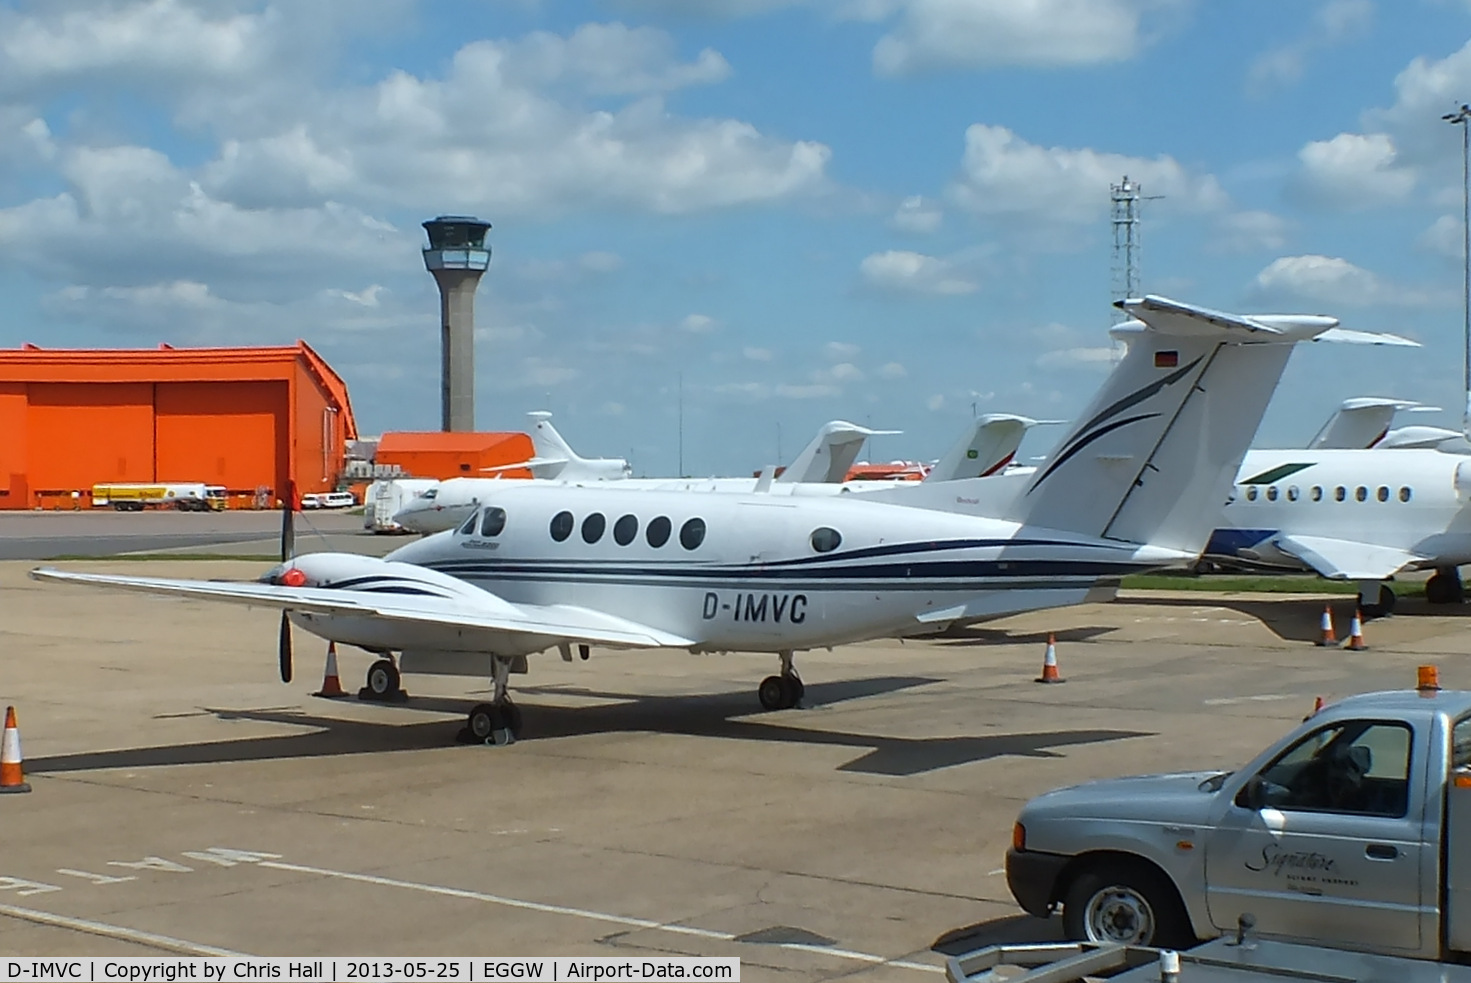 D-IMVC, 2000 Raytheon B200 King Air C/N BB-1741, visitor for the Champions League Final